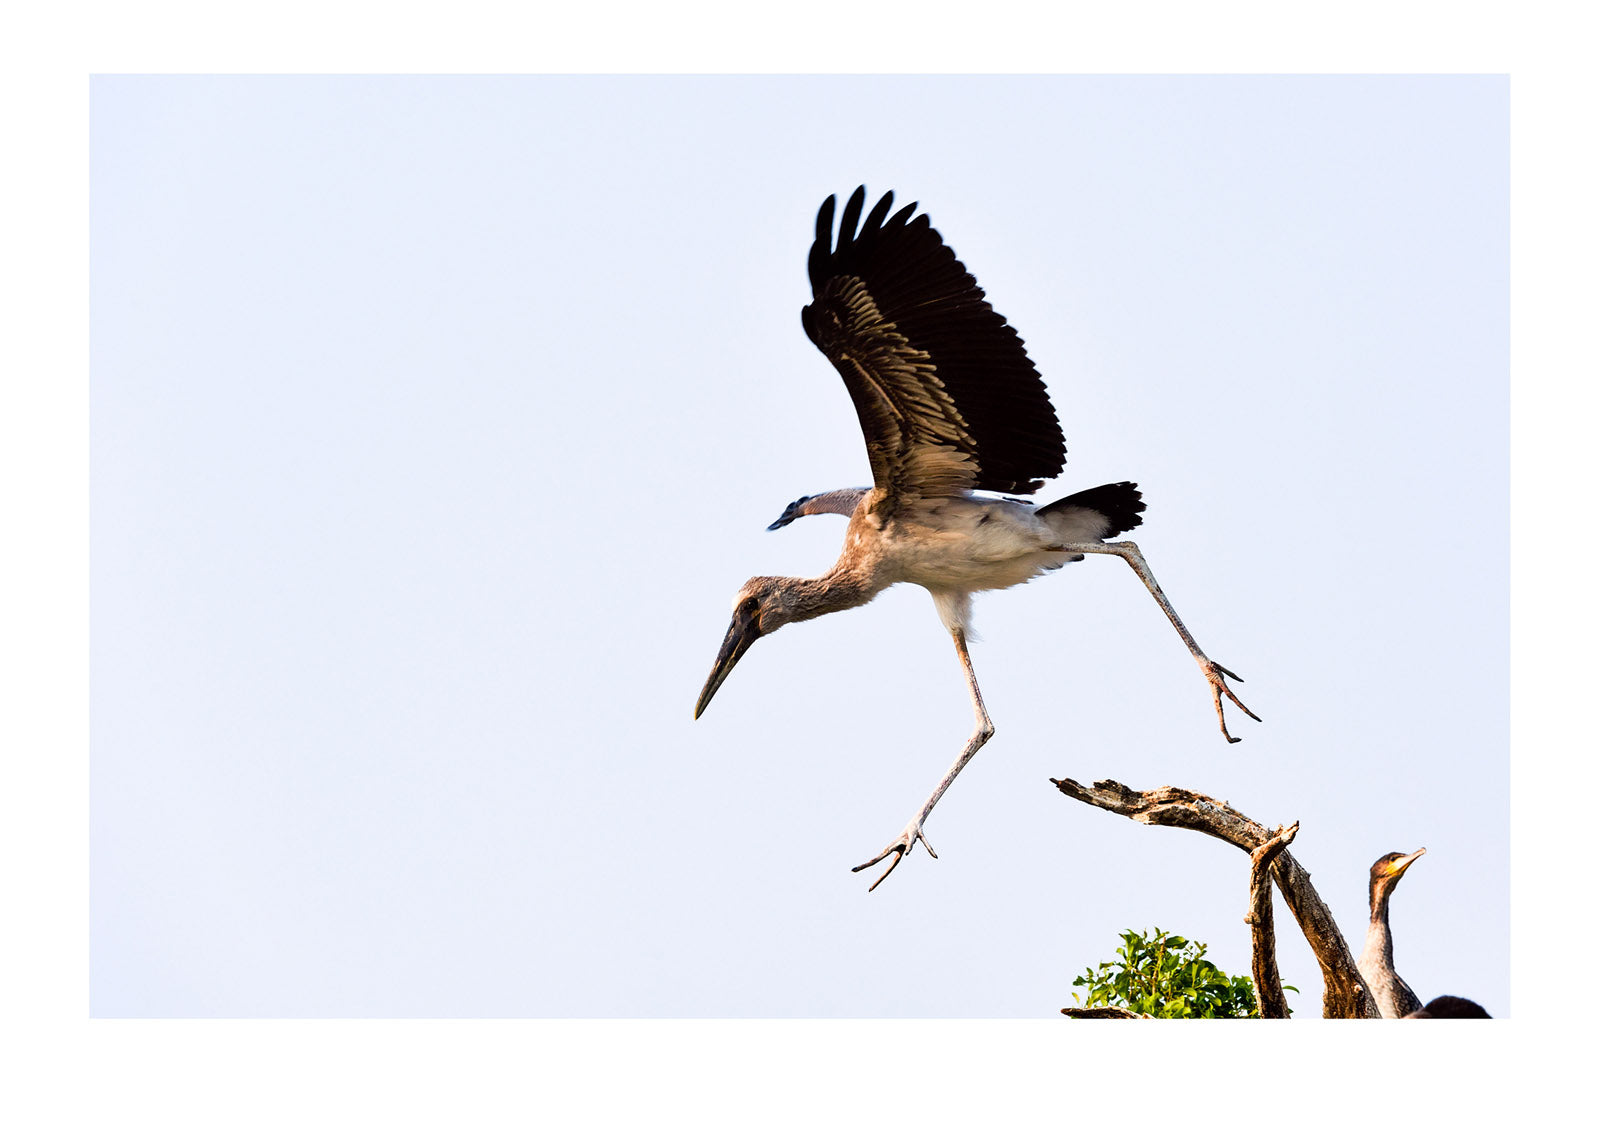 A Yellow-billed Stork chick tests it's wings in flight in a rookery. Chobe River, Chobe National Park, Botswana.